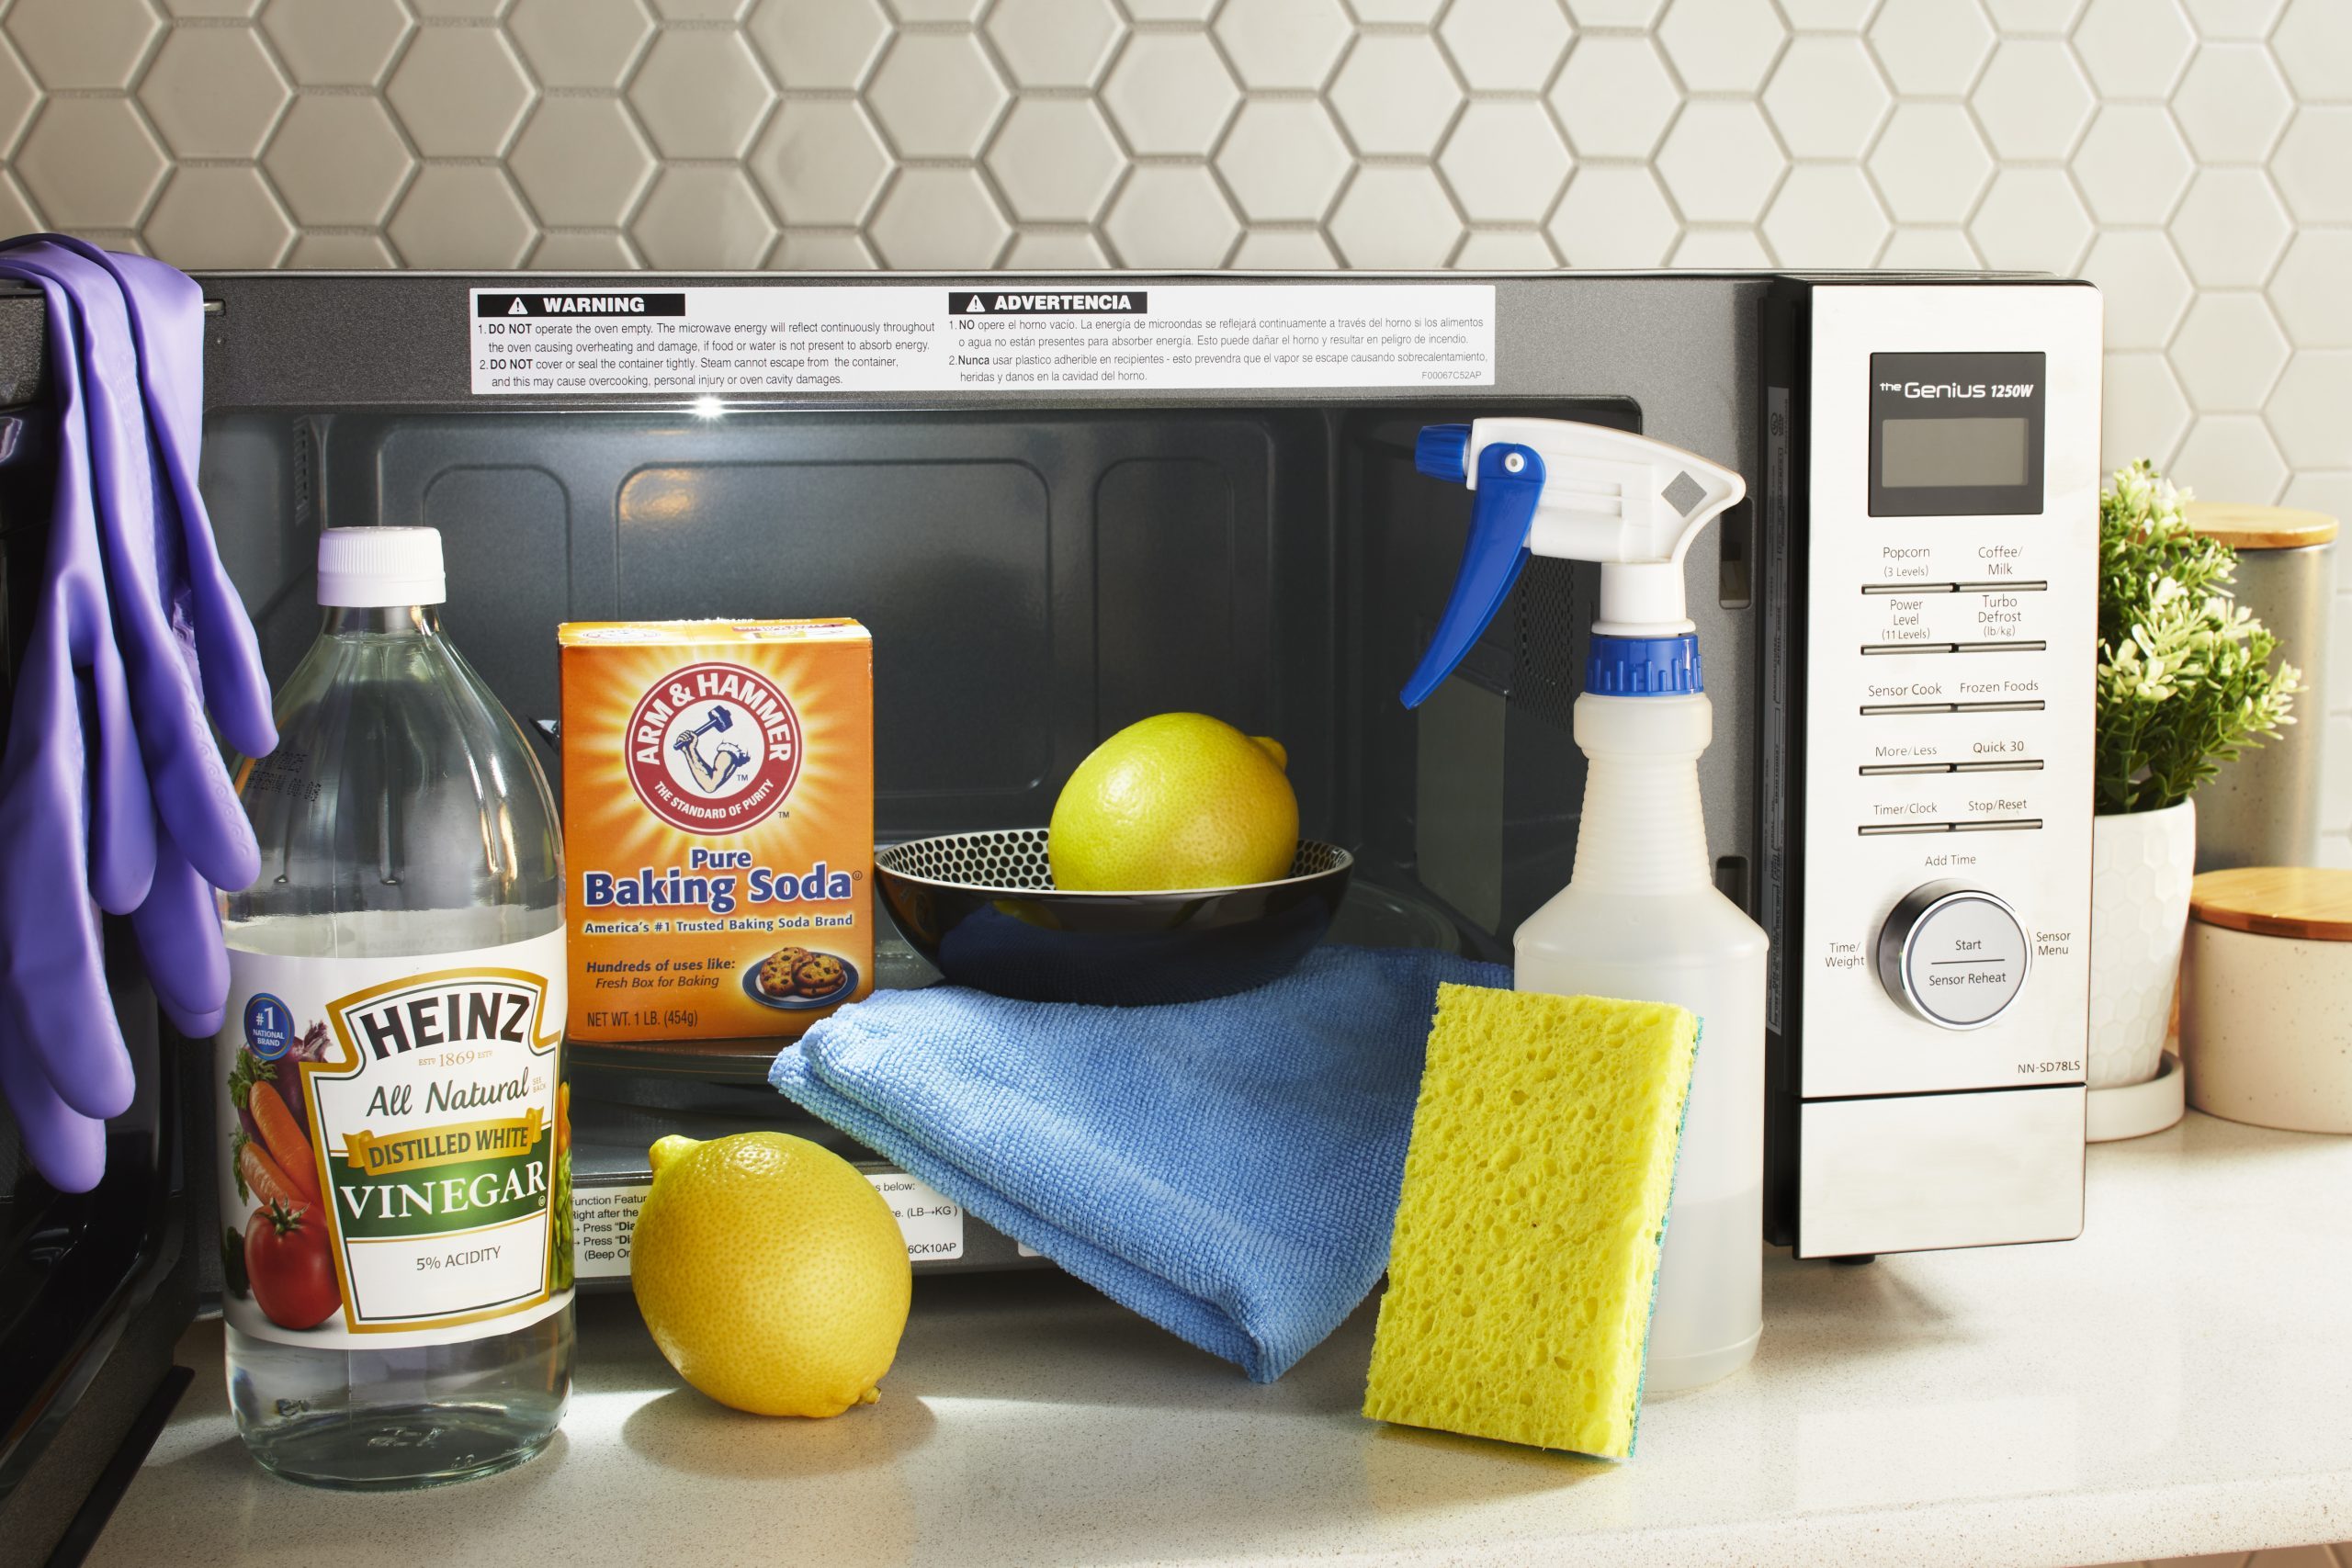 https://www.rd.com/wp-content/uploads/2021/03/RDigital_HubCleaning_microwave_007-scaled.jpg